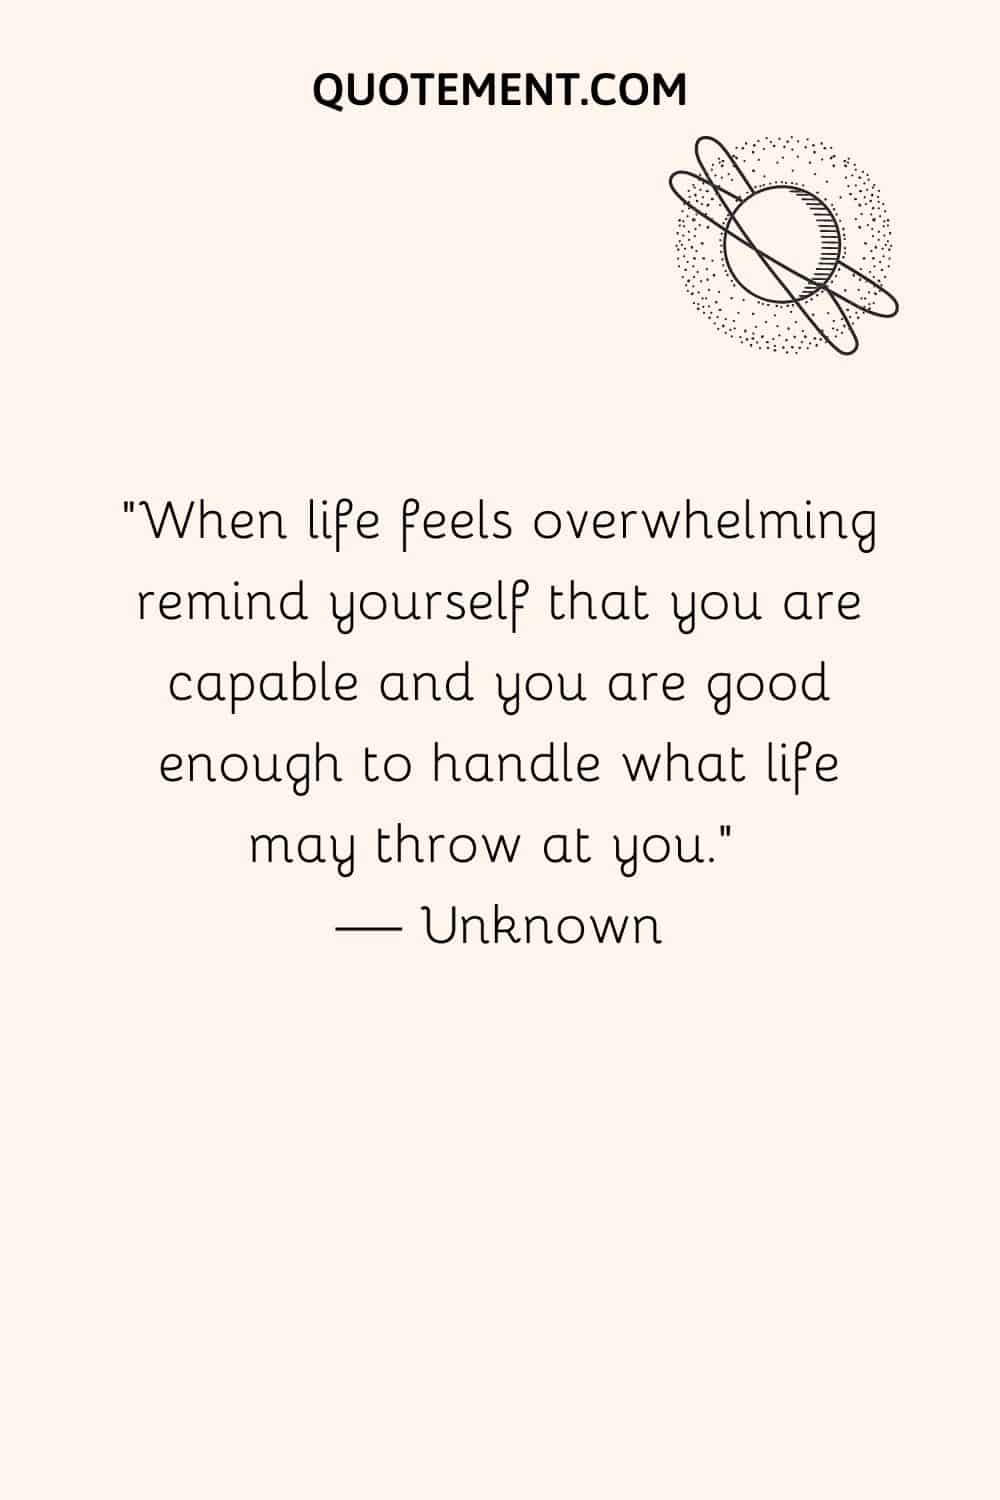 When life feels overwhelming remind yourself that you are capable and you are good enough to handle what life may throw at you